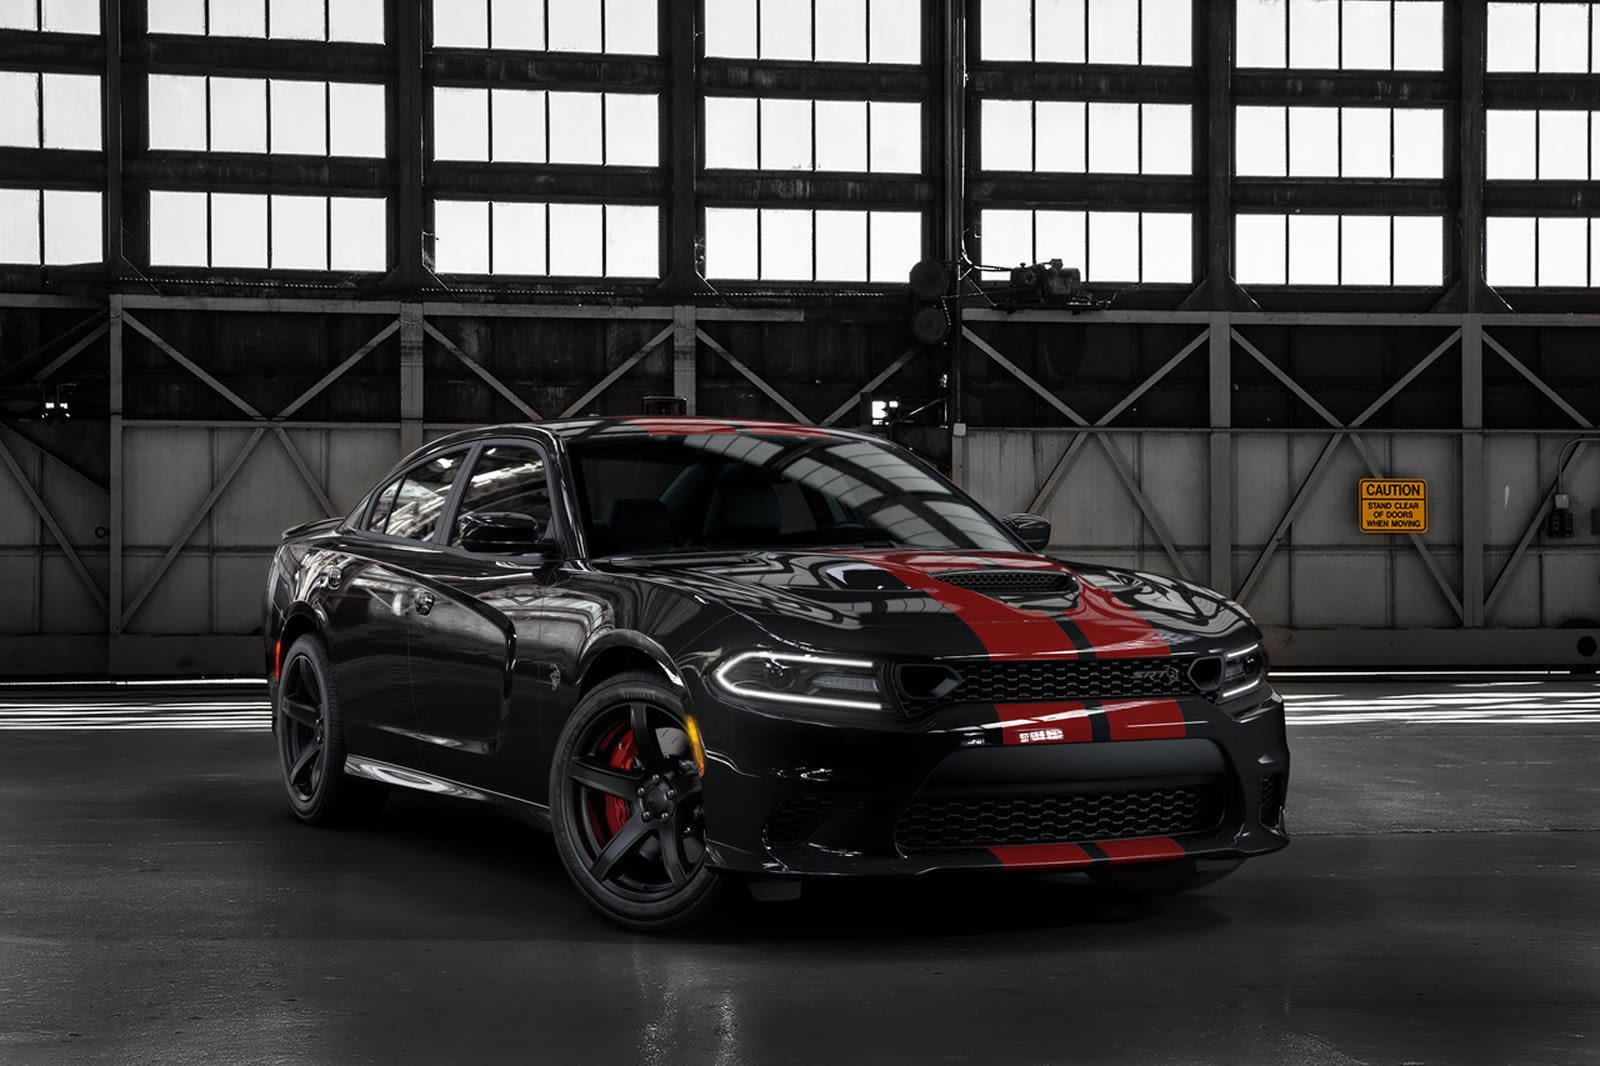 Illustration for article titled 2019 Charger Hellcat. Now with...stripes!